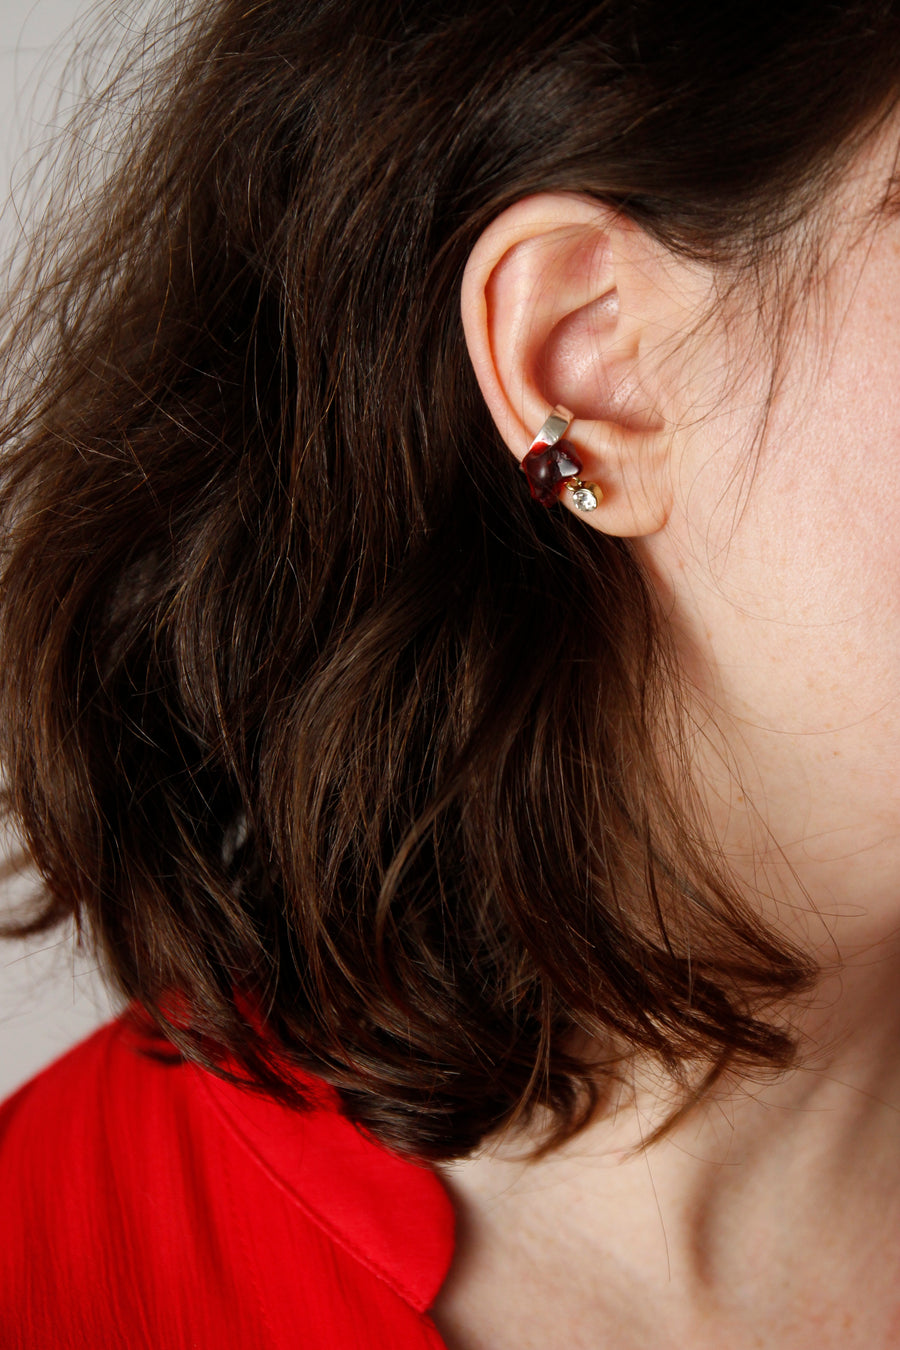 Woman wearing a One-of-a-Kind Handcrafted Dangling Ear Cuff by Gré with red Agate and sterling silver chain